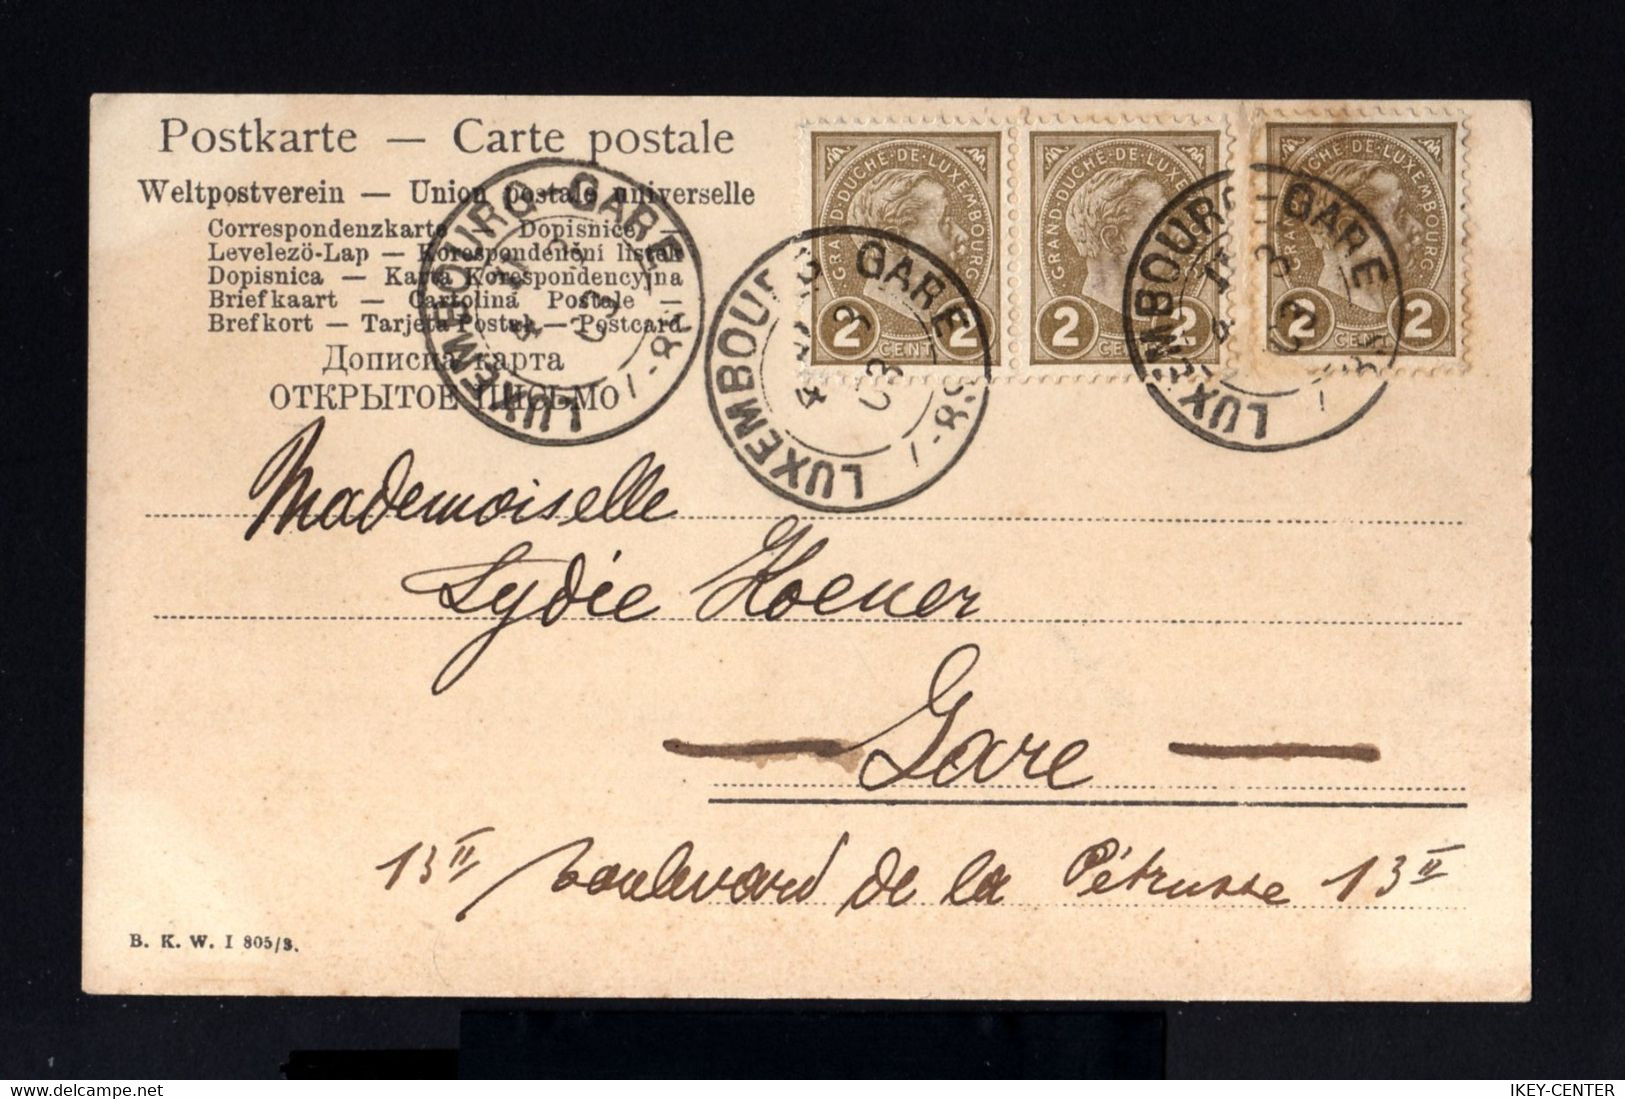 6101-LUXEMBURG-OLD POSTCARD LUXEMBOURG GARE.1903.WWII.Carte Postale LUXEMBOURG - 1895 Adolphe Profil